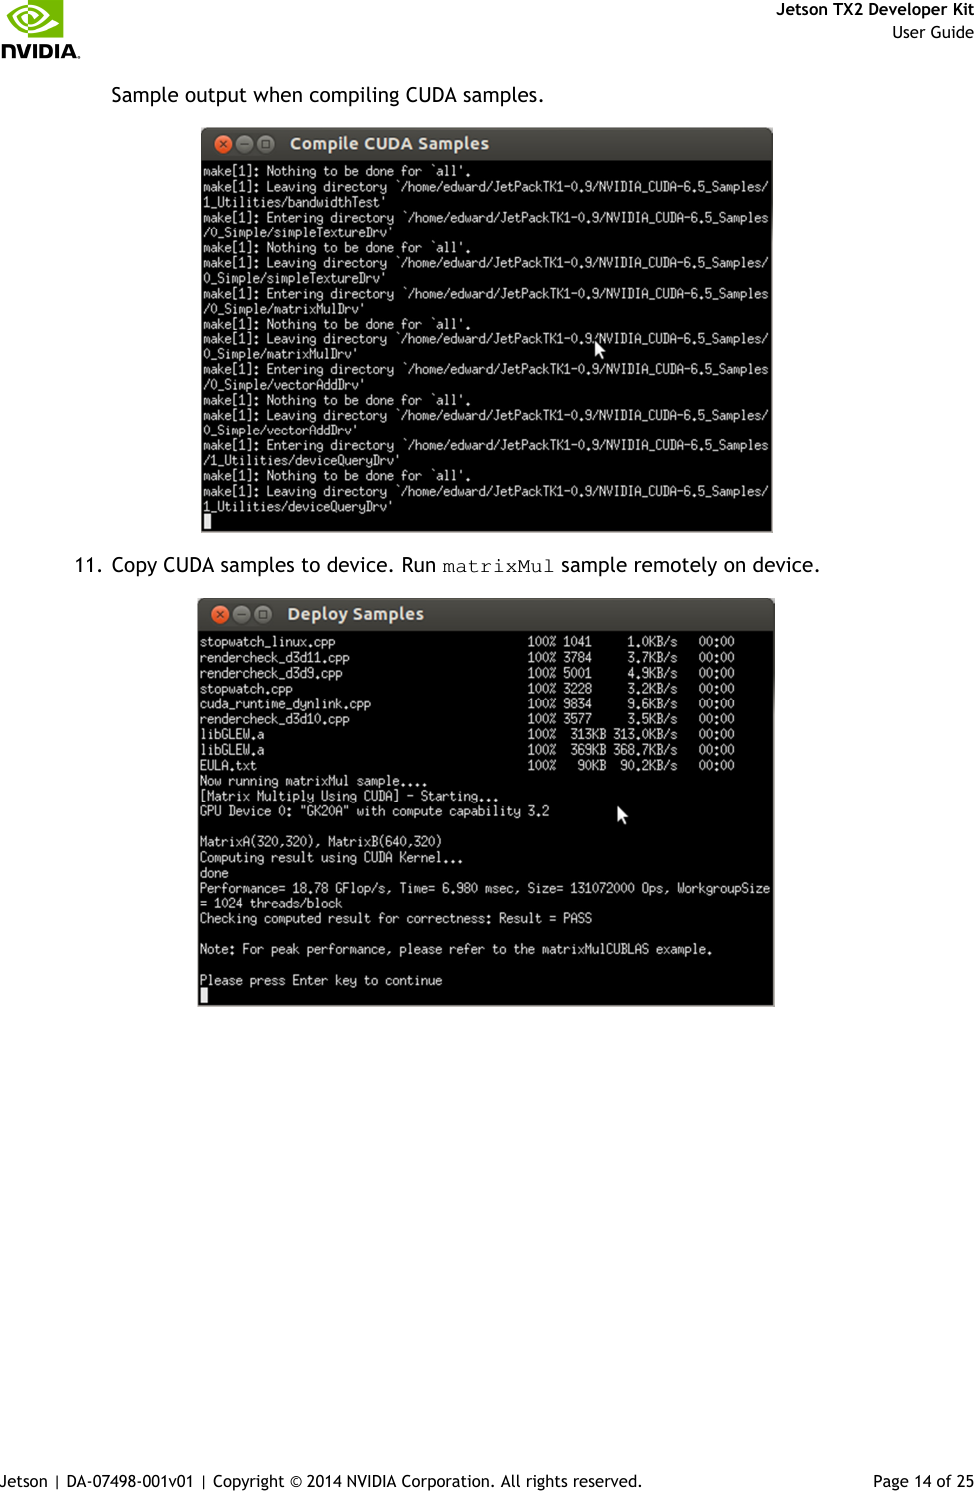     Jetson TX2 Developer Kit     User Guide Jetson | DA-07498-001v01 | Copyright © 2014 NVIDIA Corporation. All rights reserved.  Page 14 of 25 Sample output when compiling CUDA samples.  11. Copy CUDA samples to device. Run matrixMul sample remotely on device.  